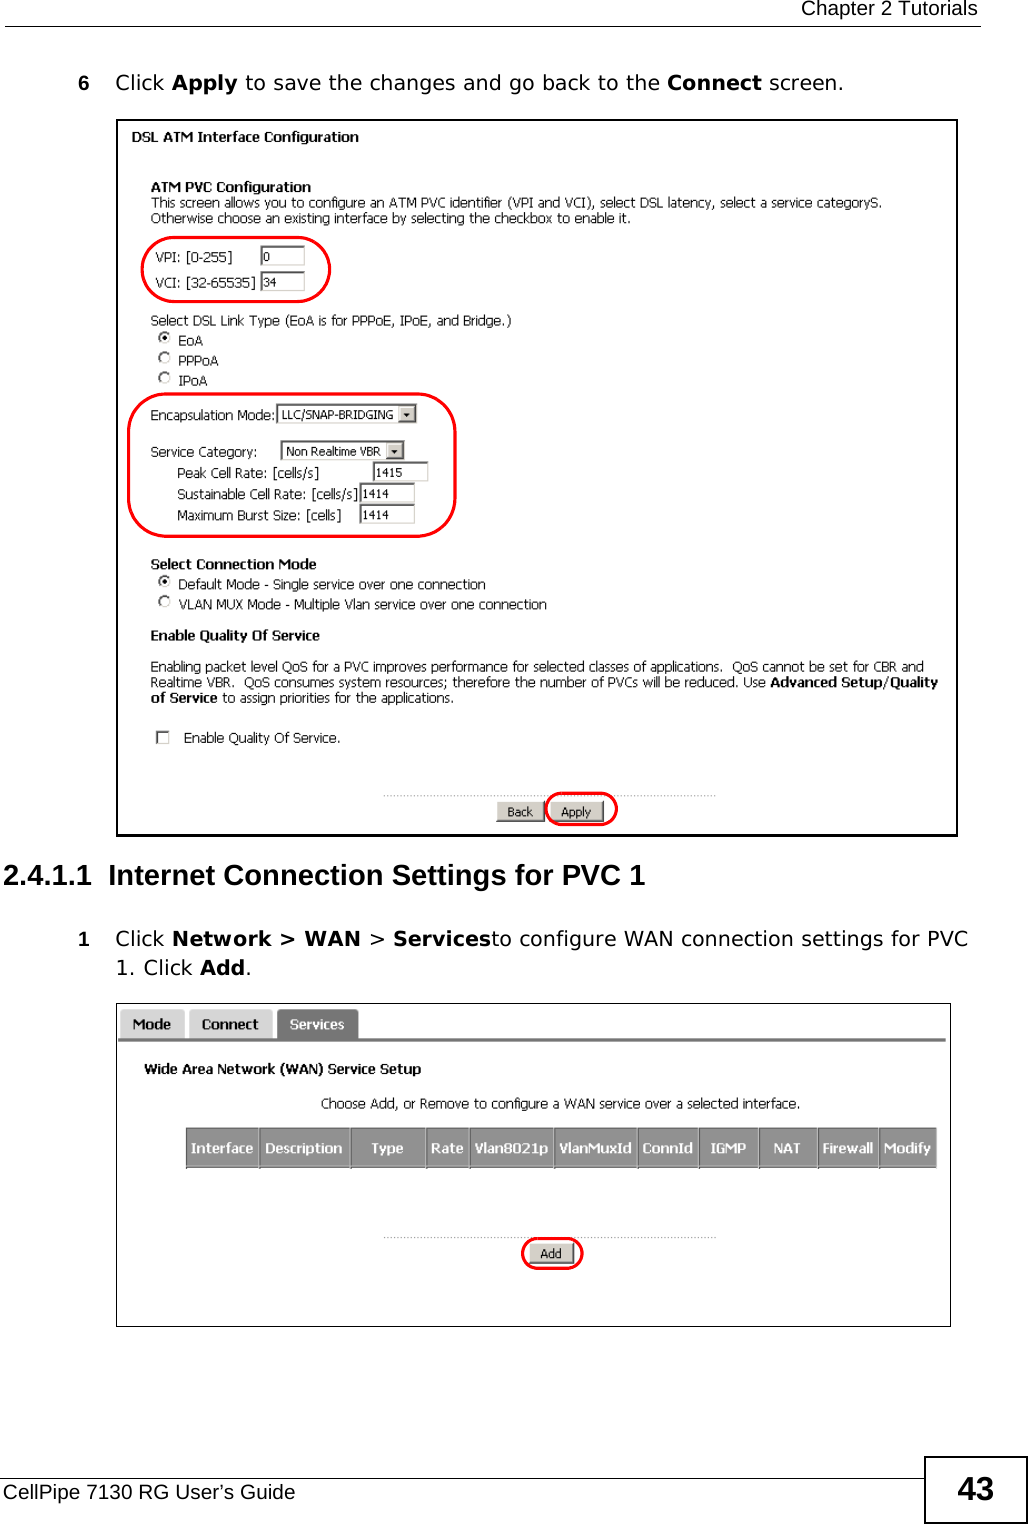  Chapter 2 TutorialsCellPipe 7130 RG User’s Guide 436Click Apply to save the changes and go back to the Connect screen.2.4.1.1  Internet Connection Settings for PVC 11Click Network &gt; WAN &gt; Servicesto configure WAN connection settings for PVC 1. Click Add.